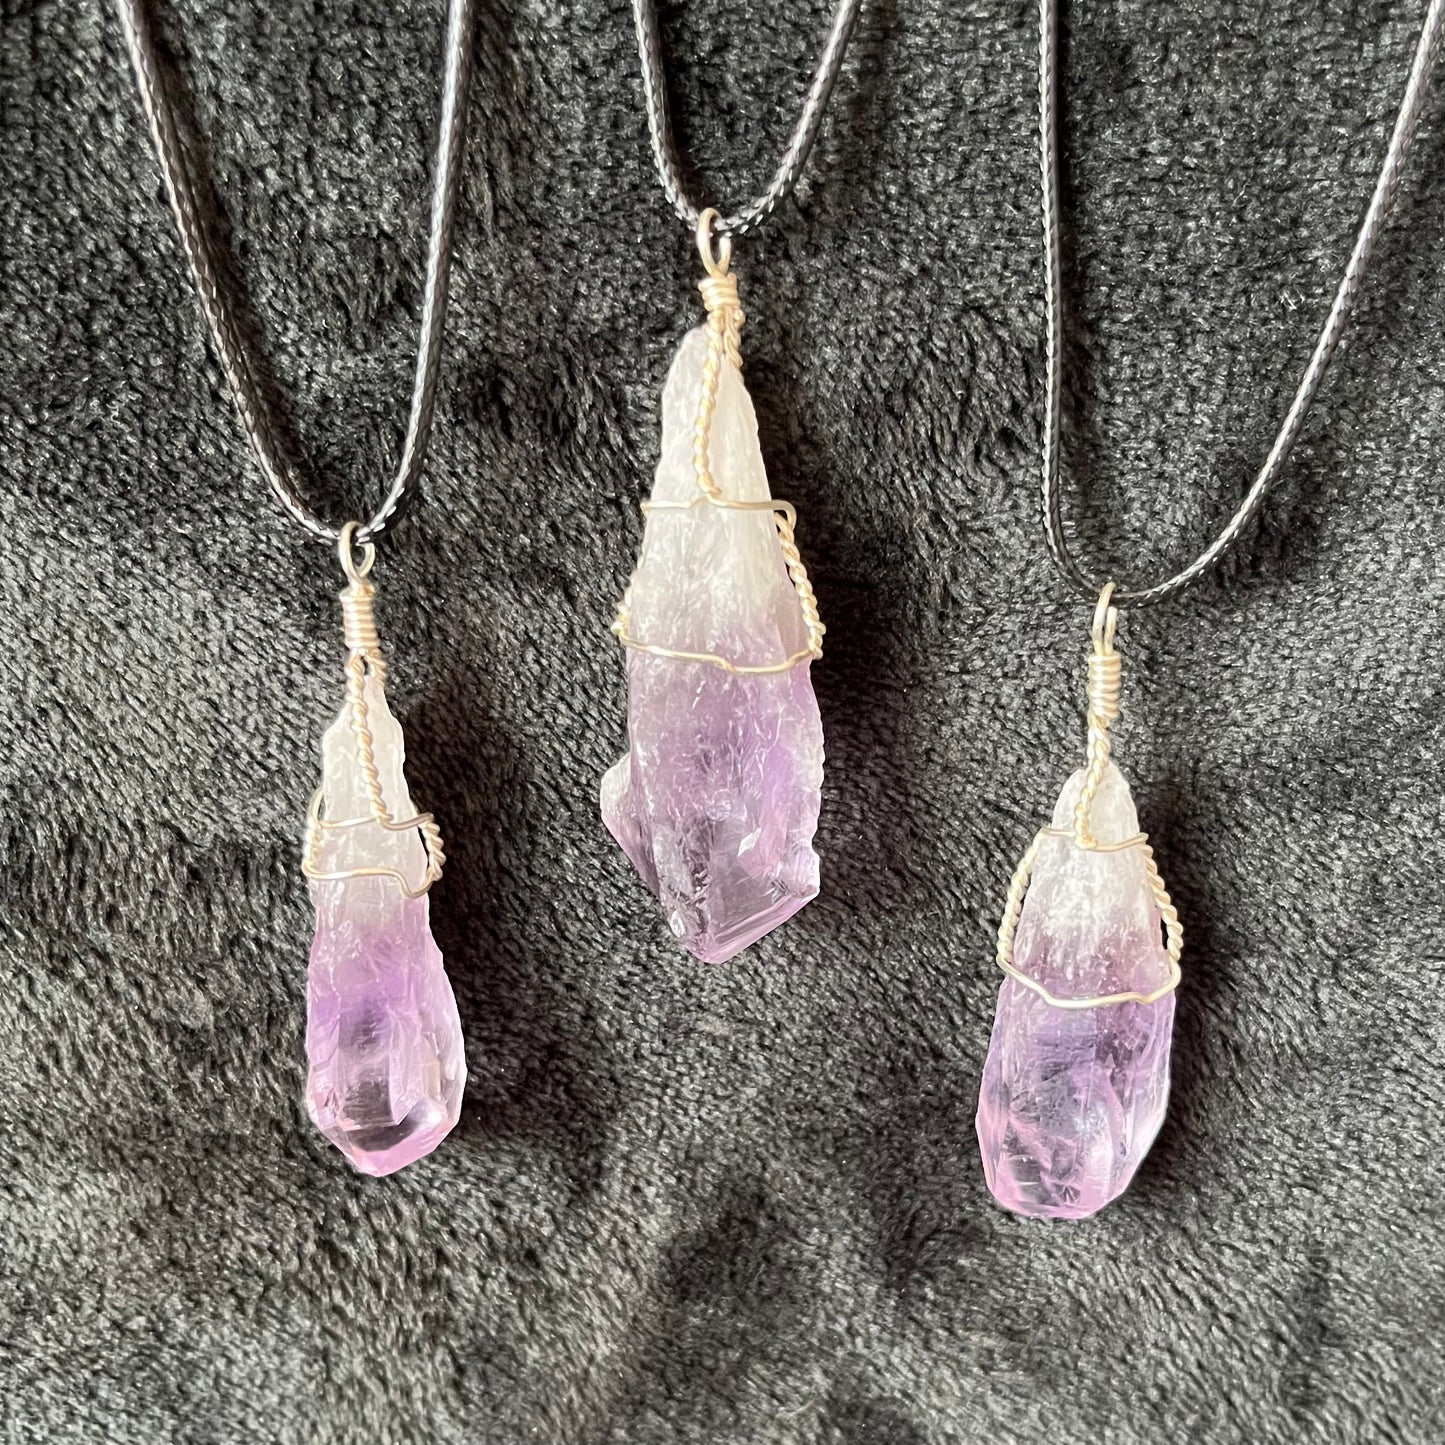 3 dragon tooth amethyst, silver wire wrapped pendants atrercued to adjistable black cords displayed against a black backgeound to luminate the whote and translucent purple colors.